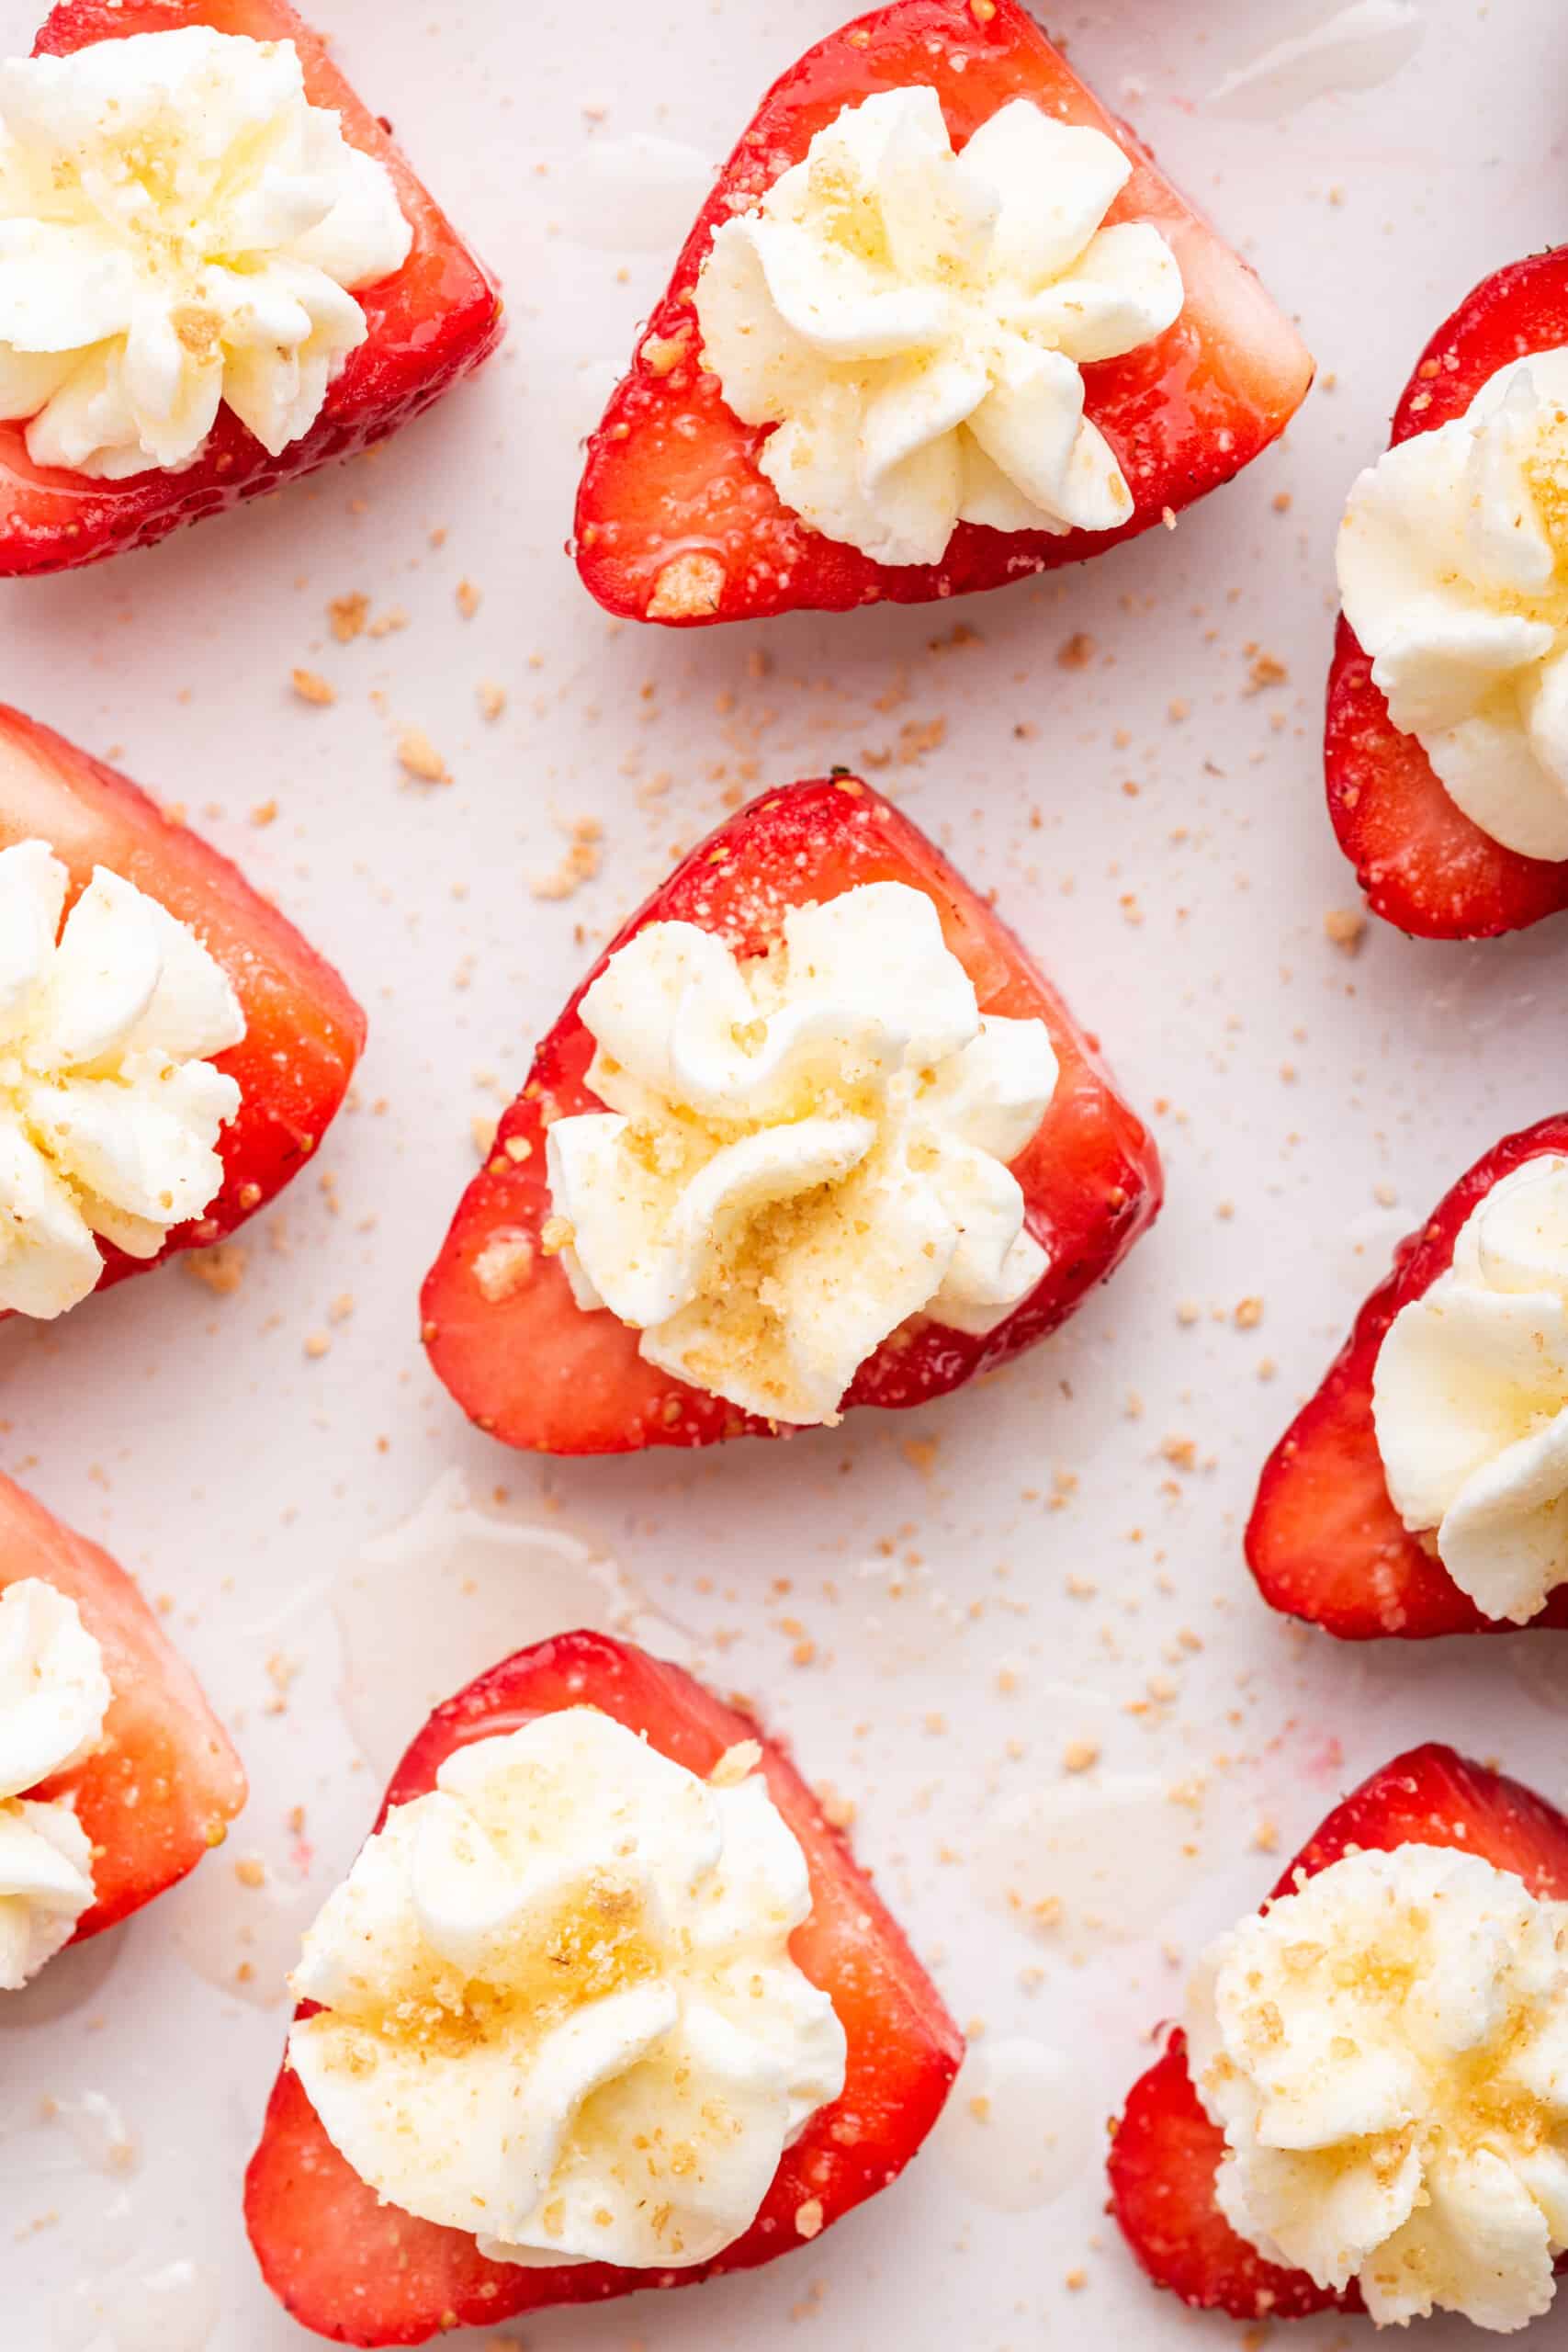 Overhead view of deviled strawberries with whipped cream